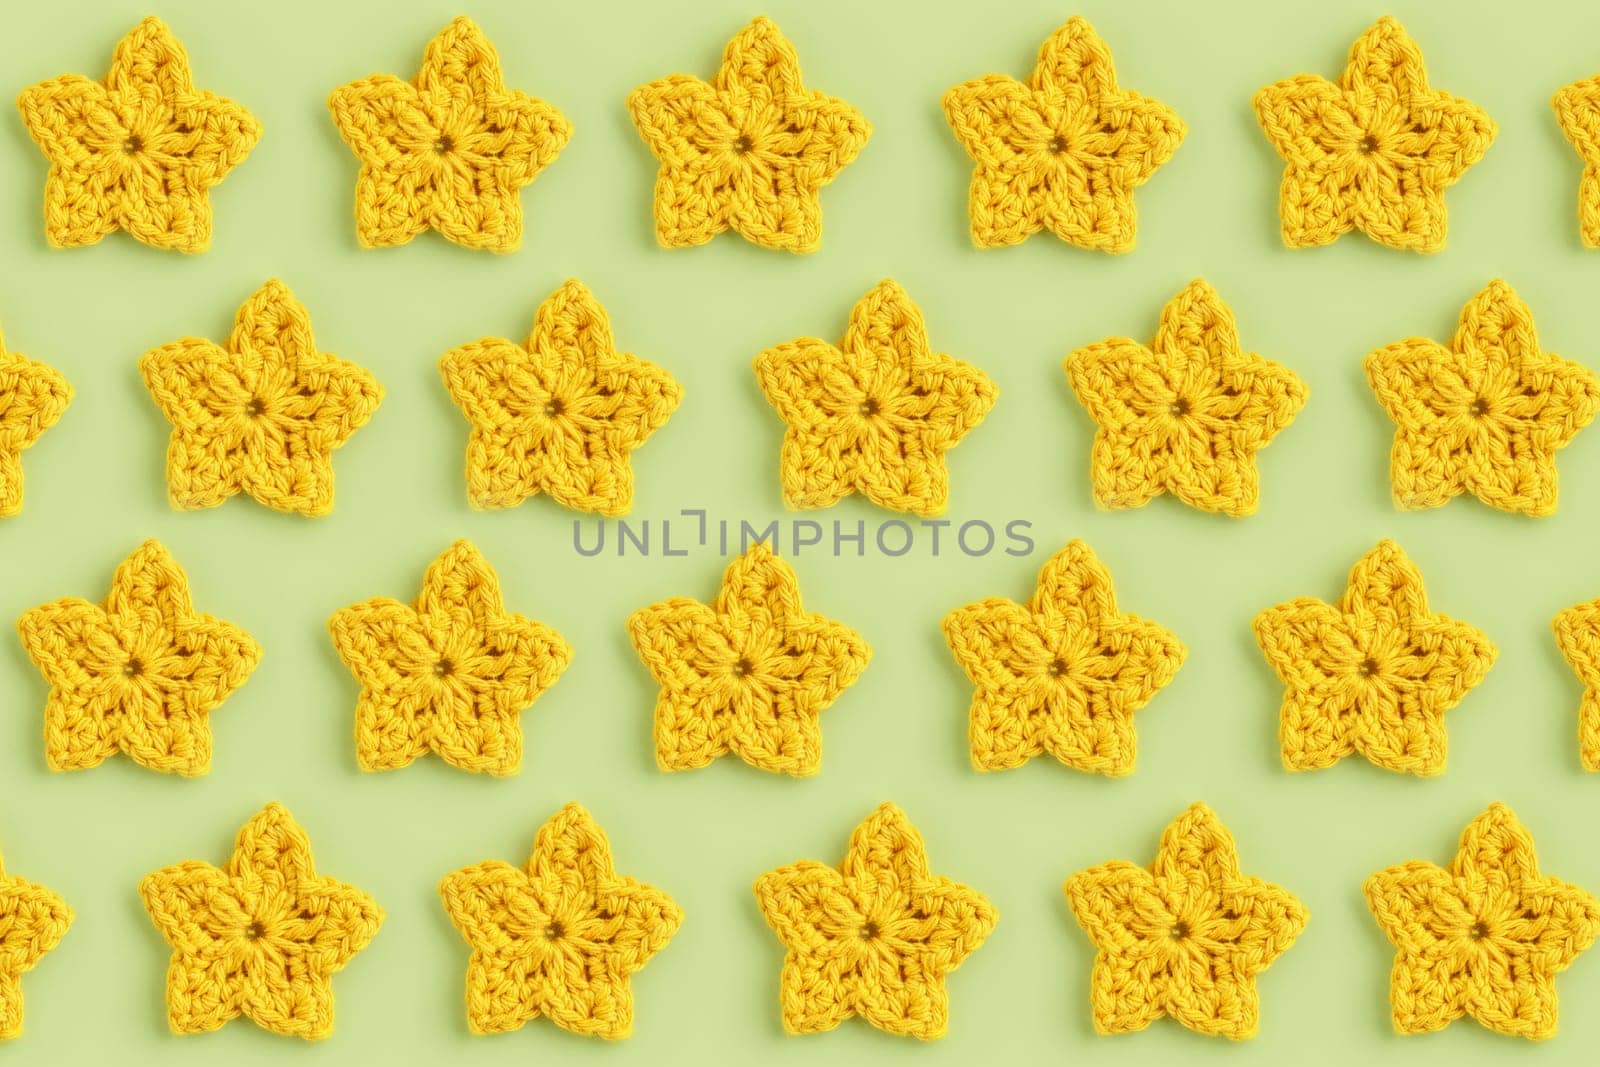 Yellow crocheted stars pattern on a green background